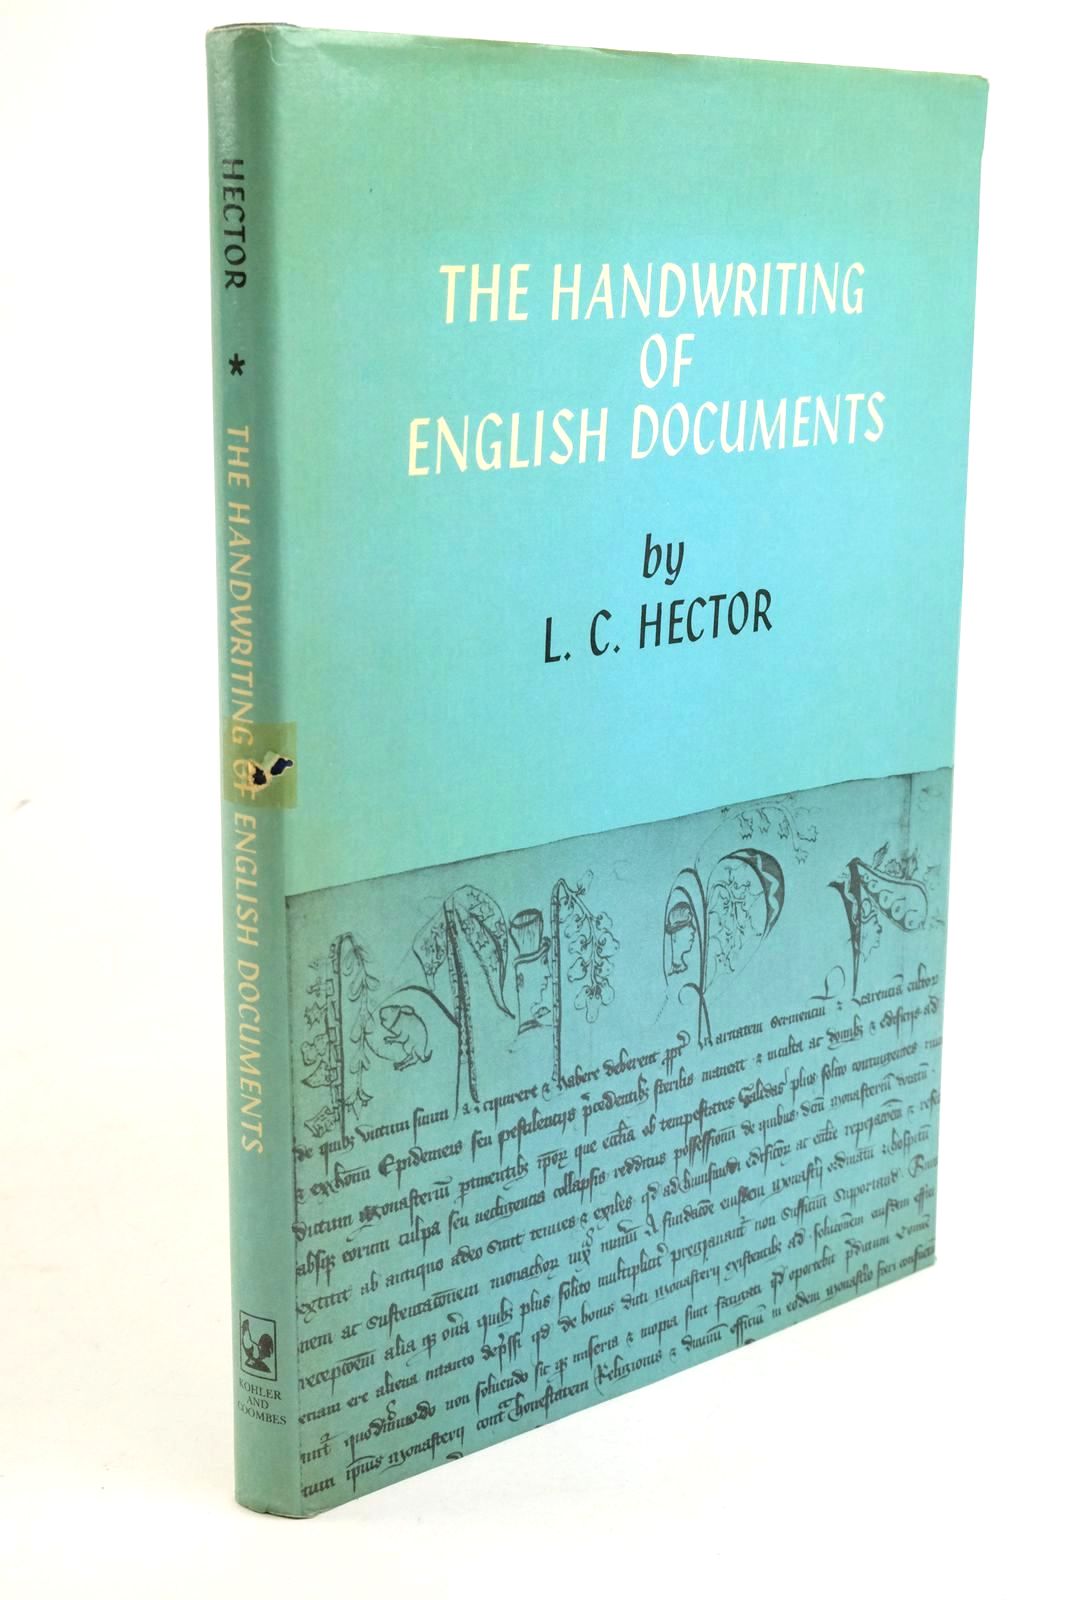 Photo of THE HANDWRITING OF ENGLISH DOCUMENTS written by Hector, L.C. published by Kohler And Coombes Ltd. (STOCK CODE: 1322417)  for sale by Stella & Rose's Books